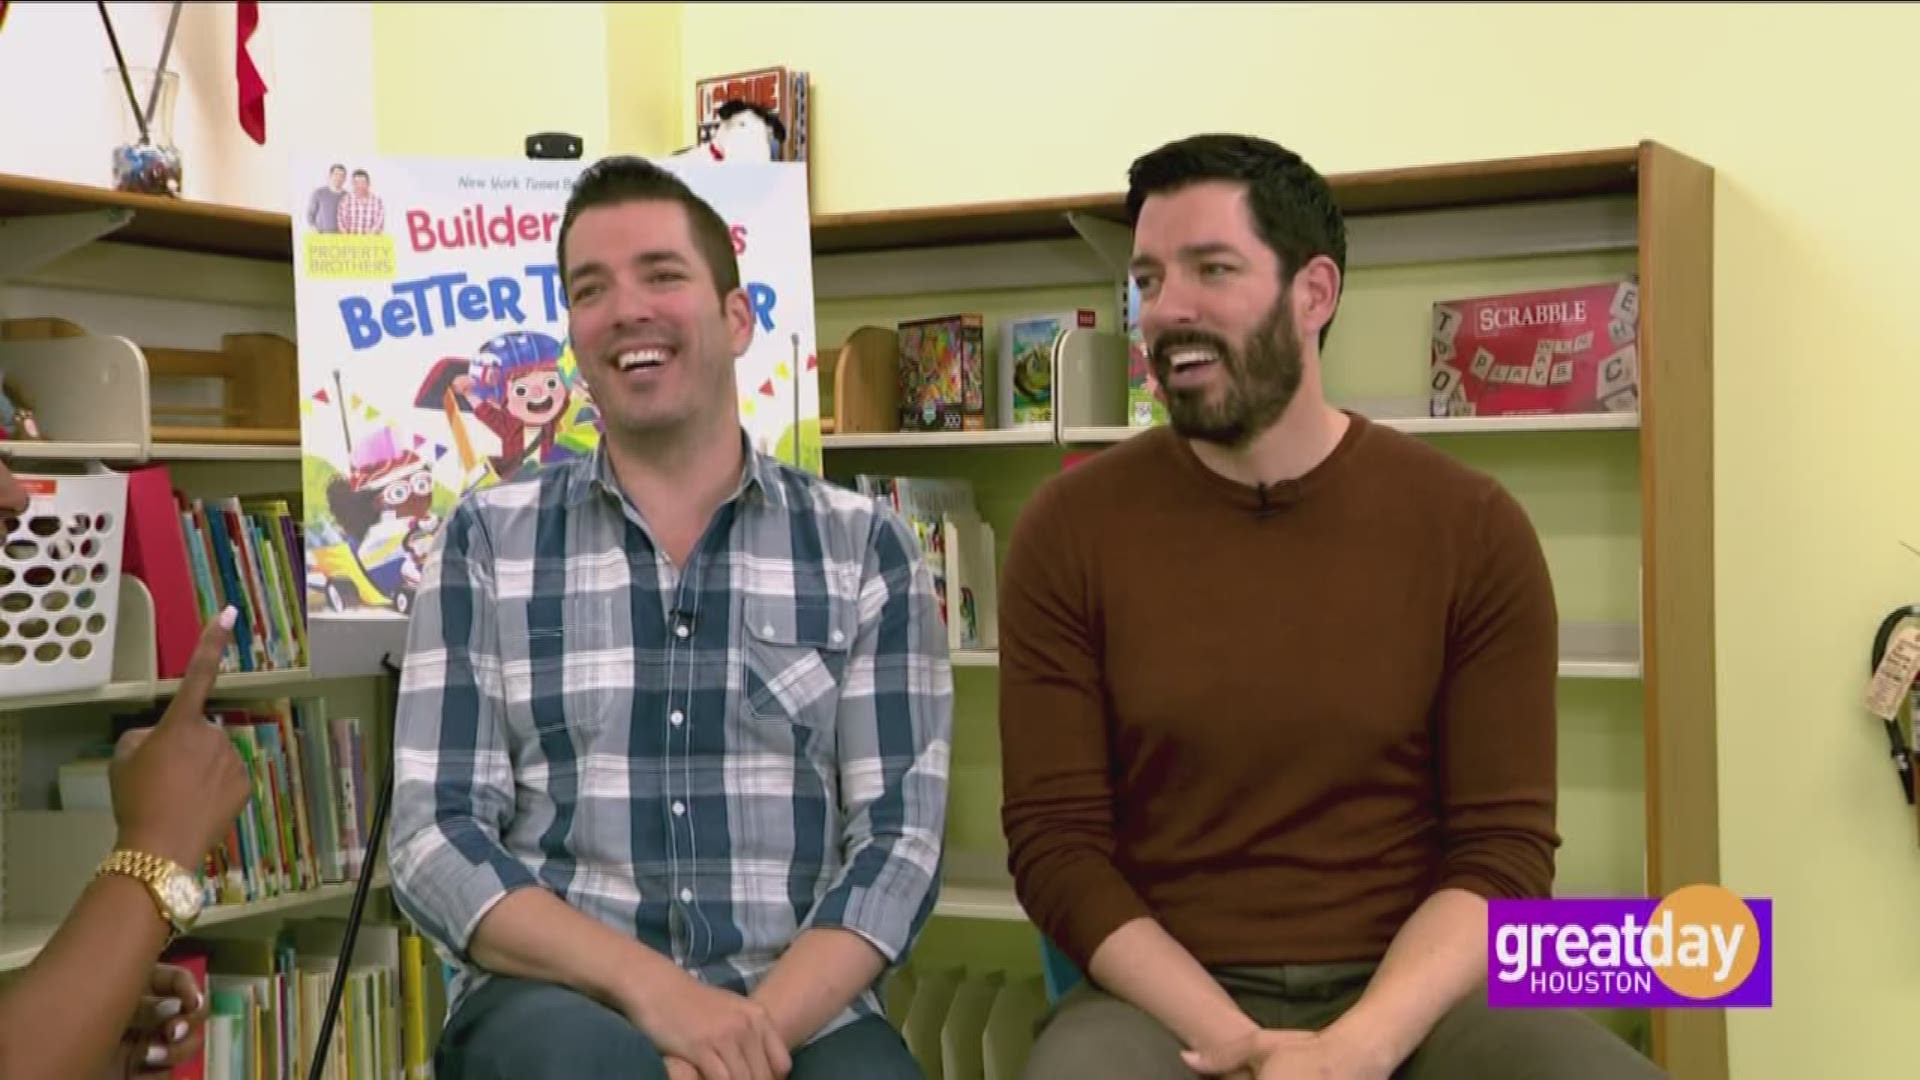 Jonathan and Drew Scott discuss the renovation of a local school library and their new book "Better Together"